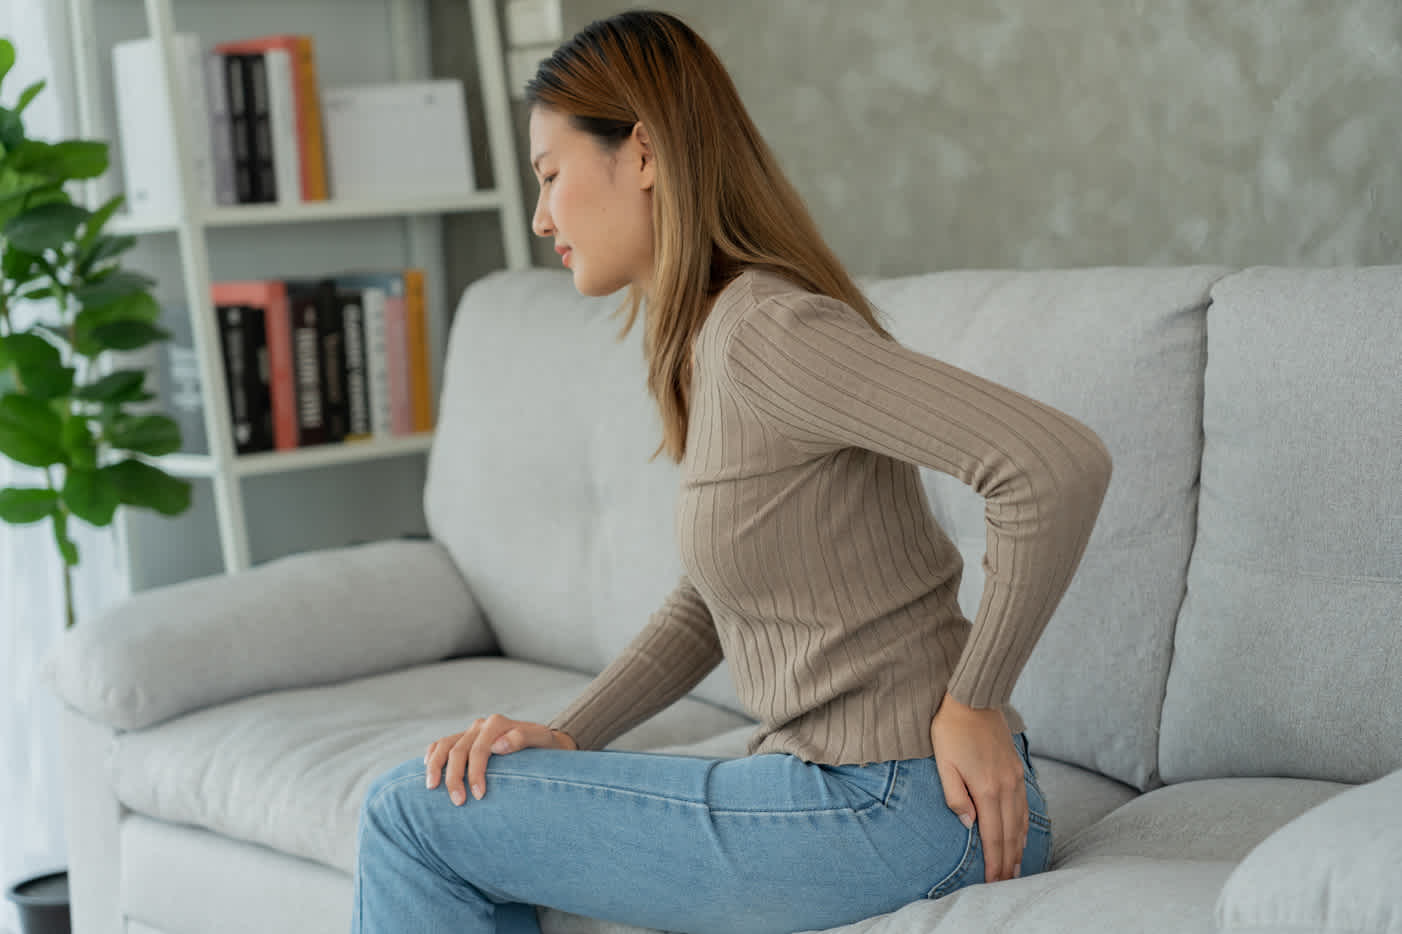 Relieve TAILBONE PAIN in SITTING  4 Physiotherapy Treatments for COCCYX  PAIN - Pelvic Exercises